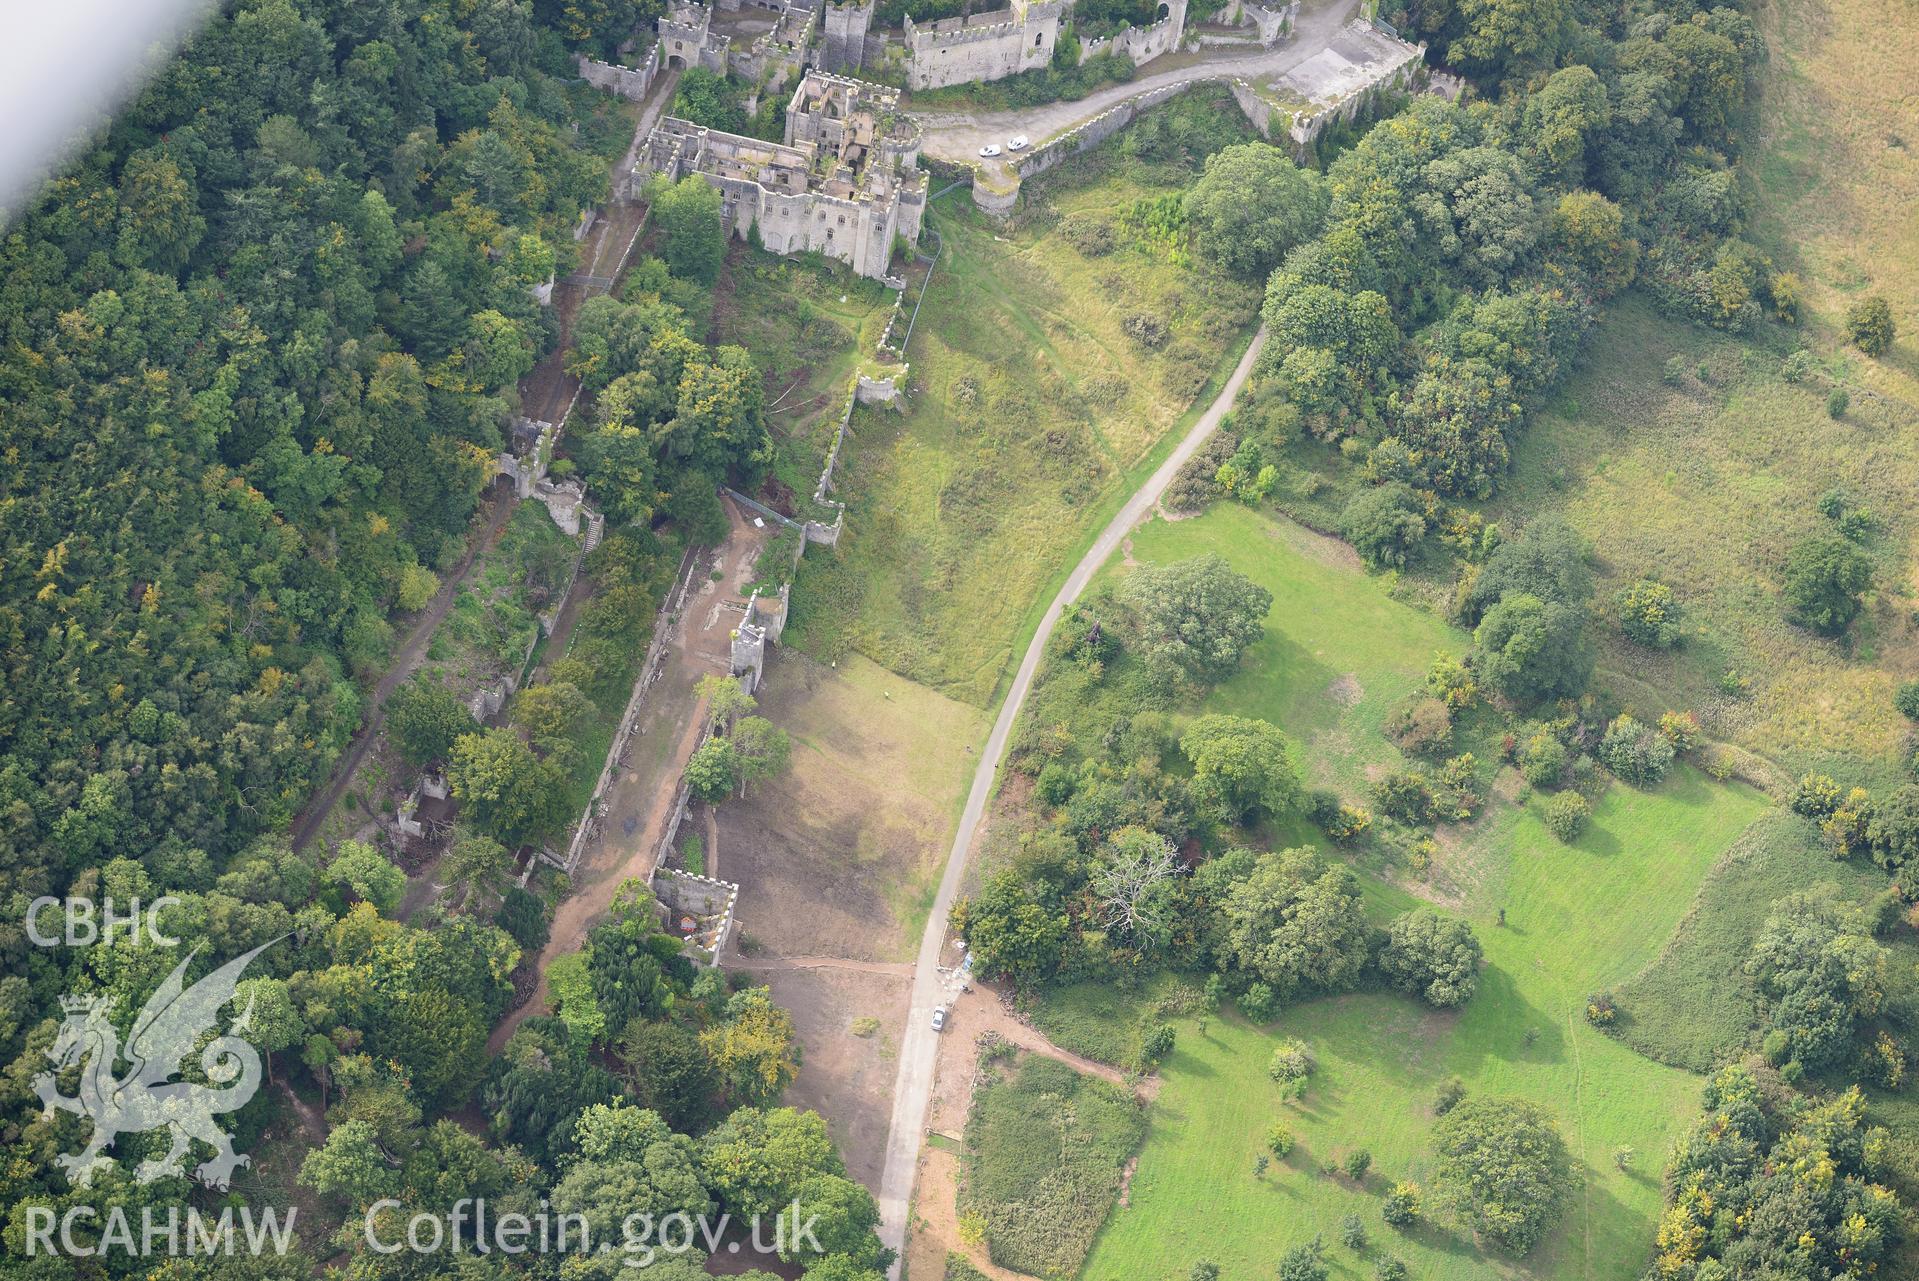 Gwrych castle and garden. Oblique aerial photograph taken during the Royal Commission's programme of archaeological aerial reconnaissance by Toby Driver on 11th September 2015.